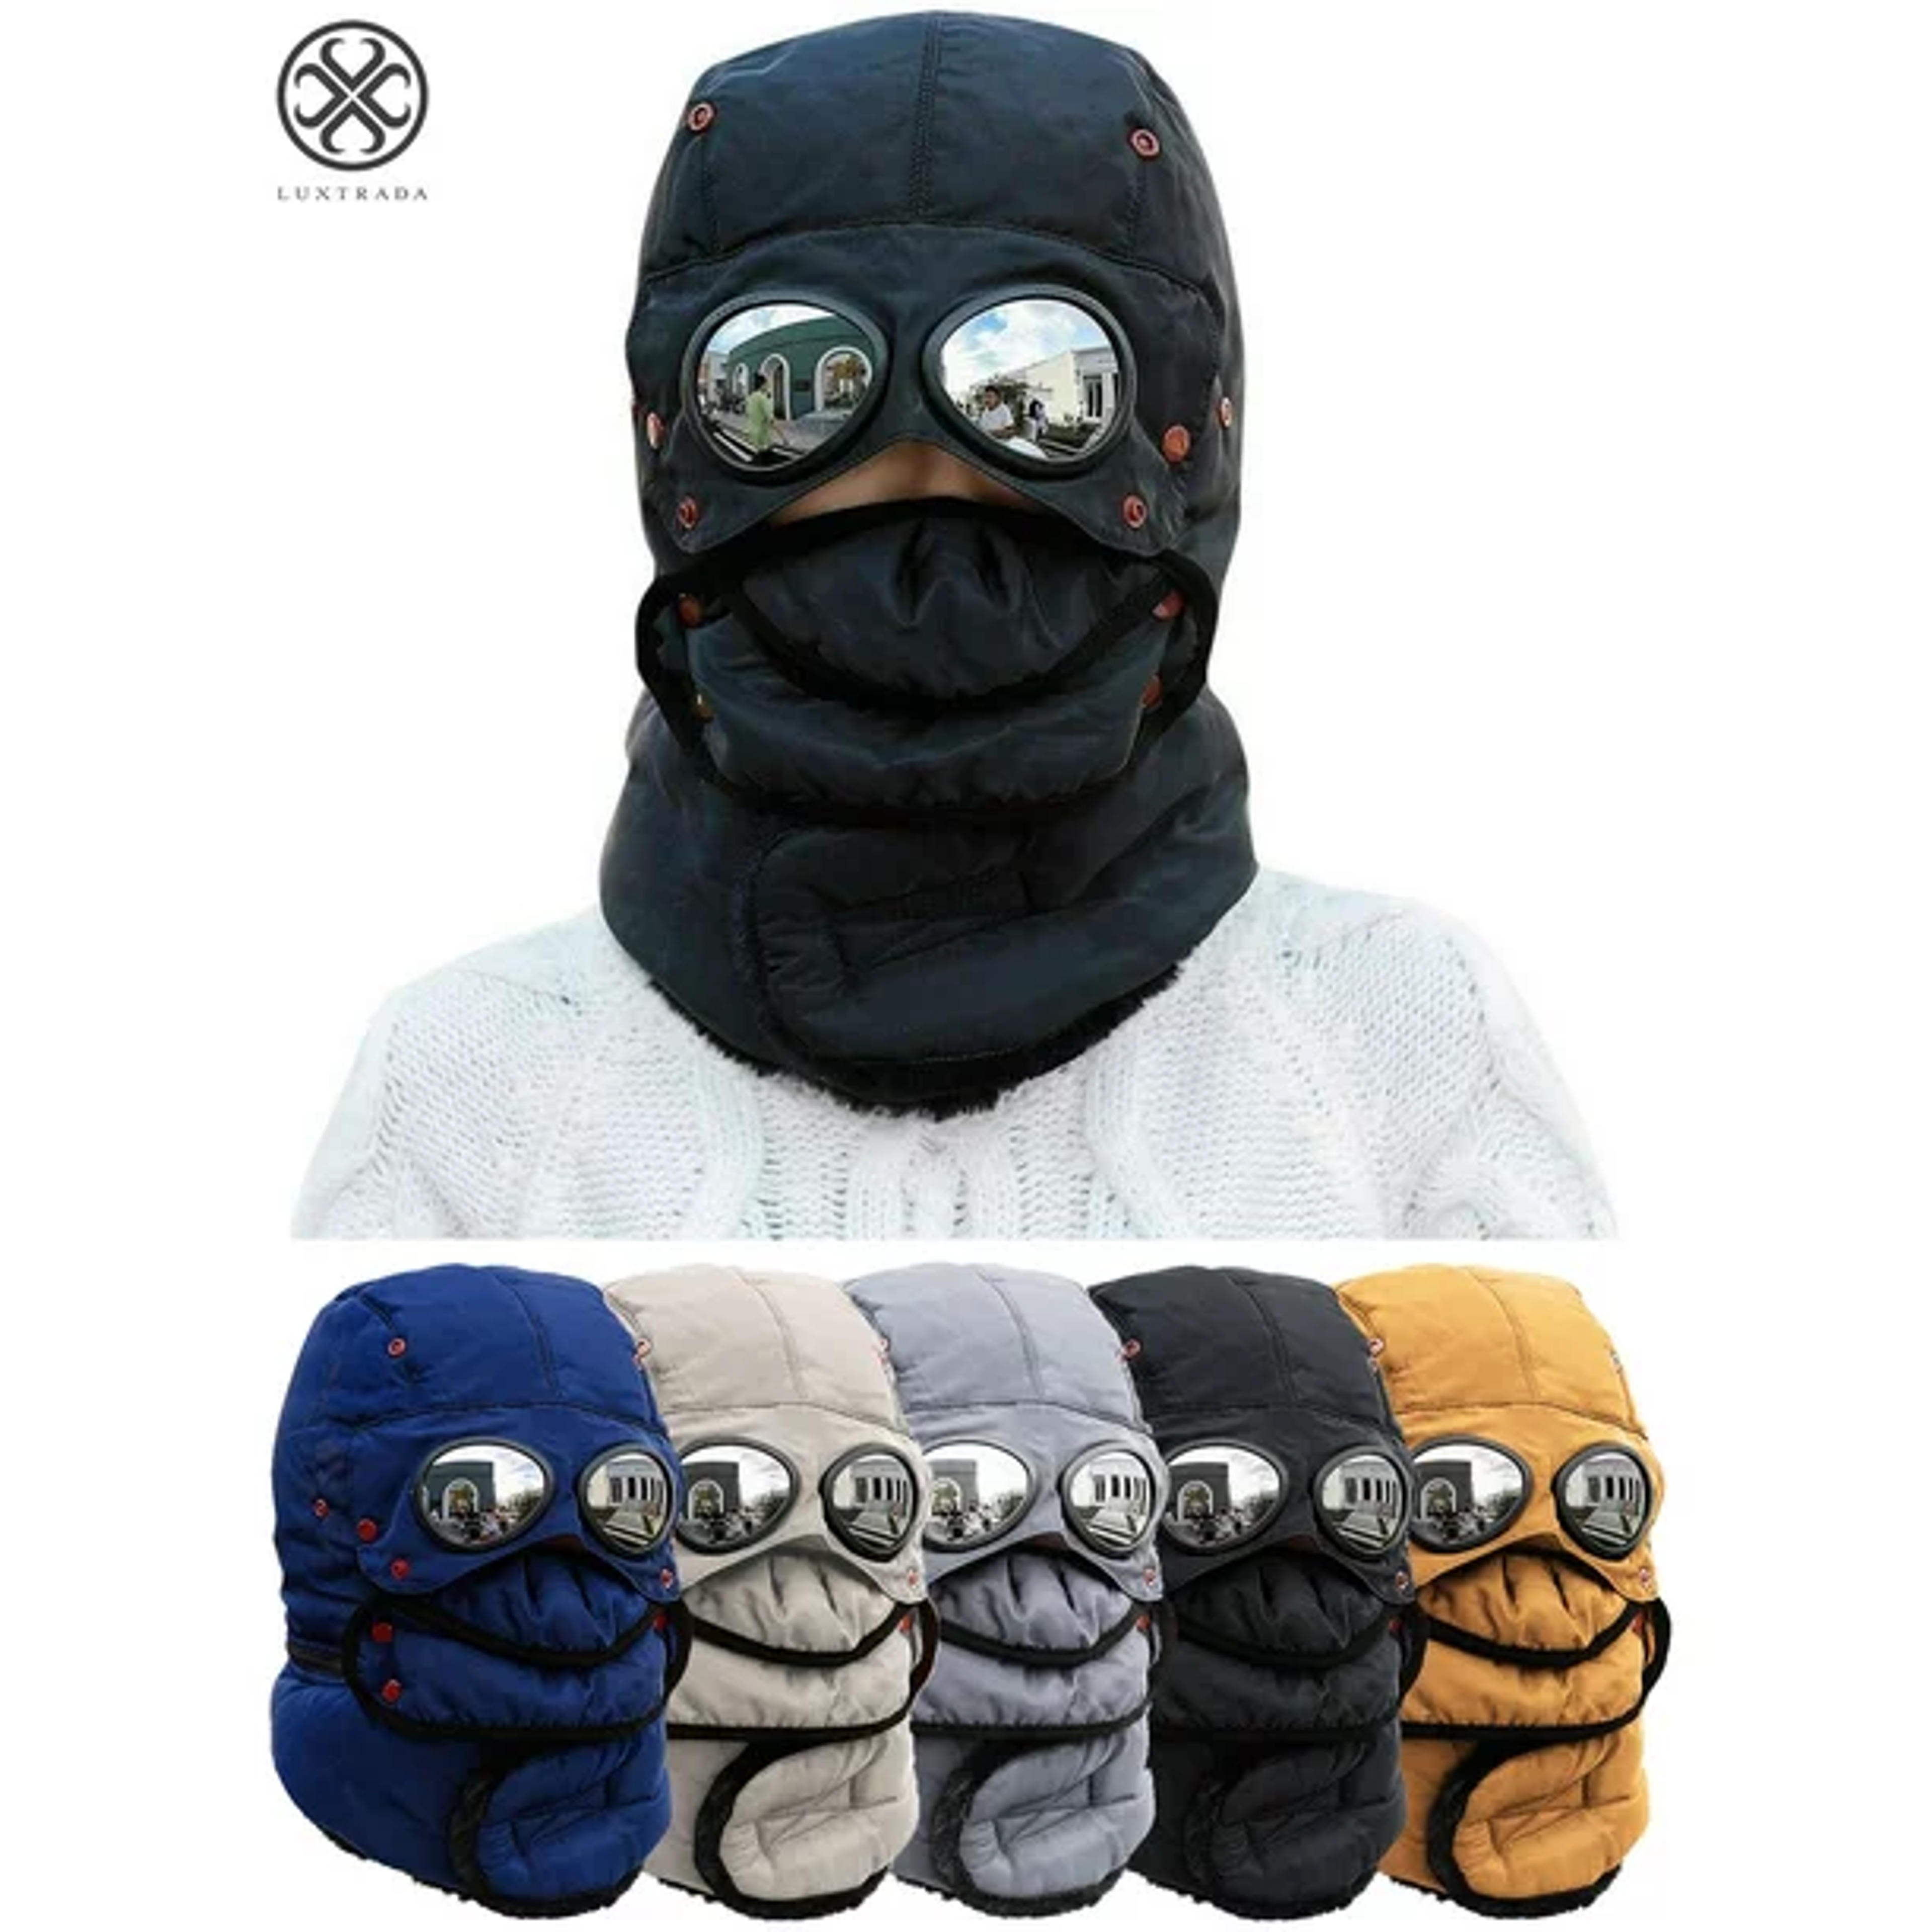 Luxtrada Thermal Winter Trapper Hat with Glasses Ski Hunting Trapper Hat Autumn Winter Cycling Windproof Outdoor Cap (Black) - Walmart.com